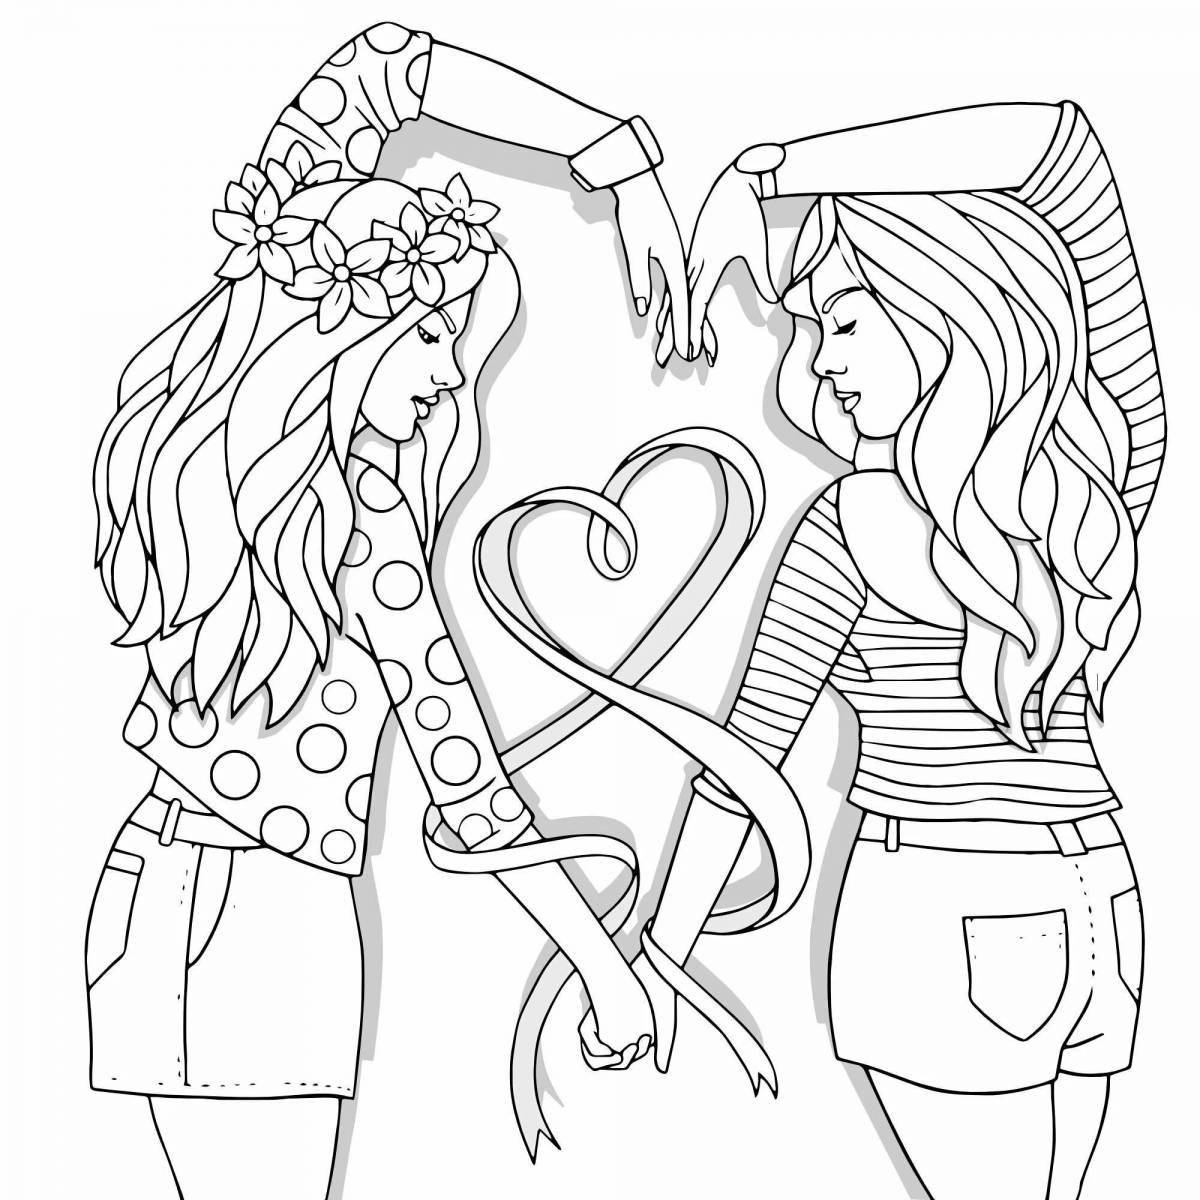 Amazing 19 year old coloring book for girls